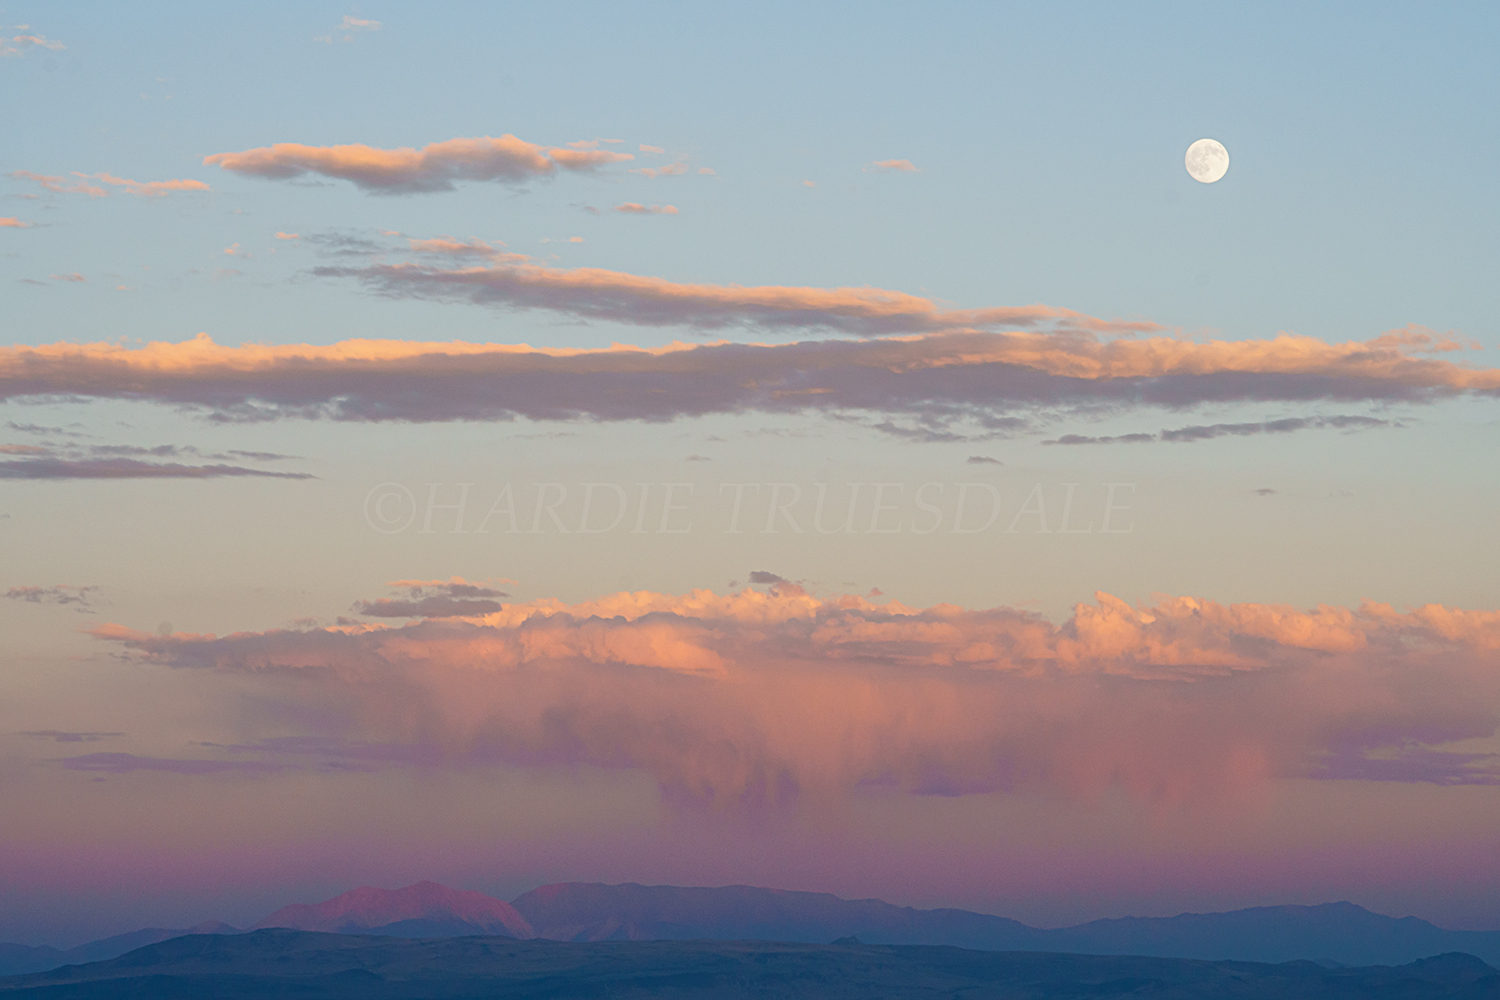 CA#161 "Moonrise, Inyo National Forest"